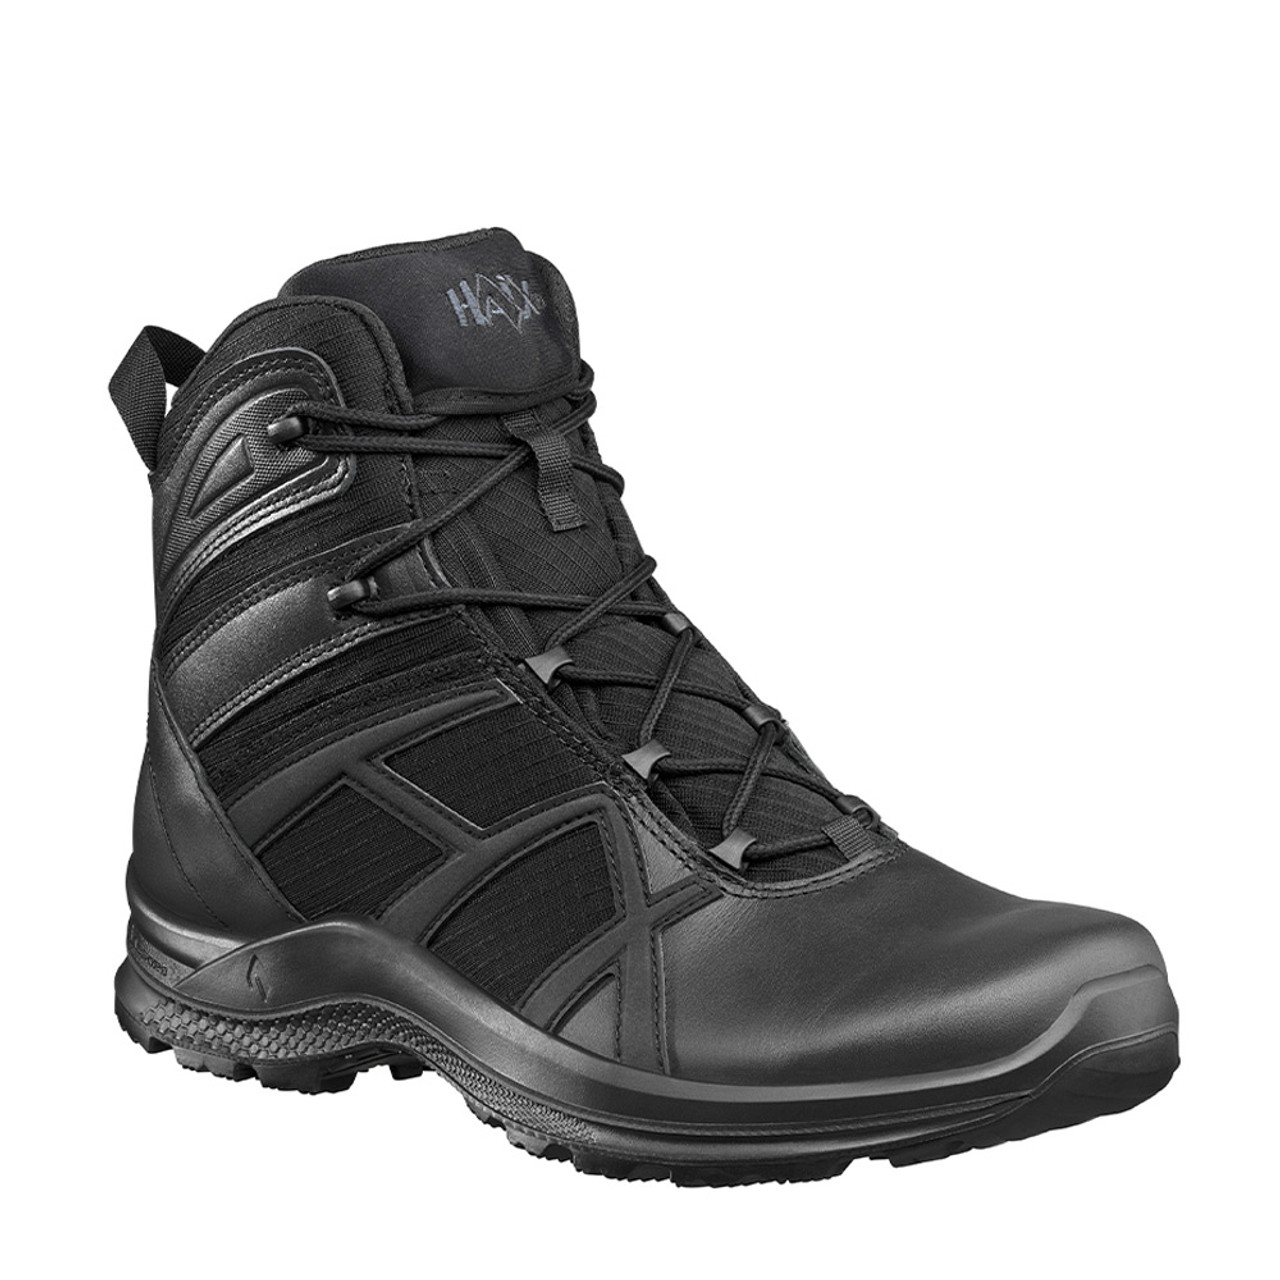 HAIX BLACK EAGLE ATHLETIC 2.1 T MID SIDE ZIP BOOTS 330113 